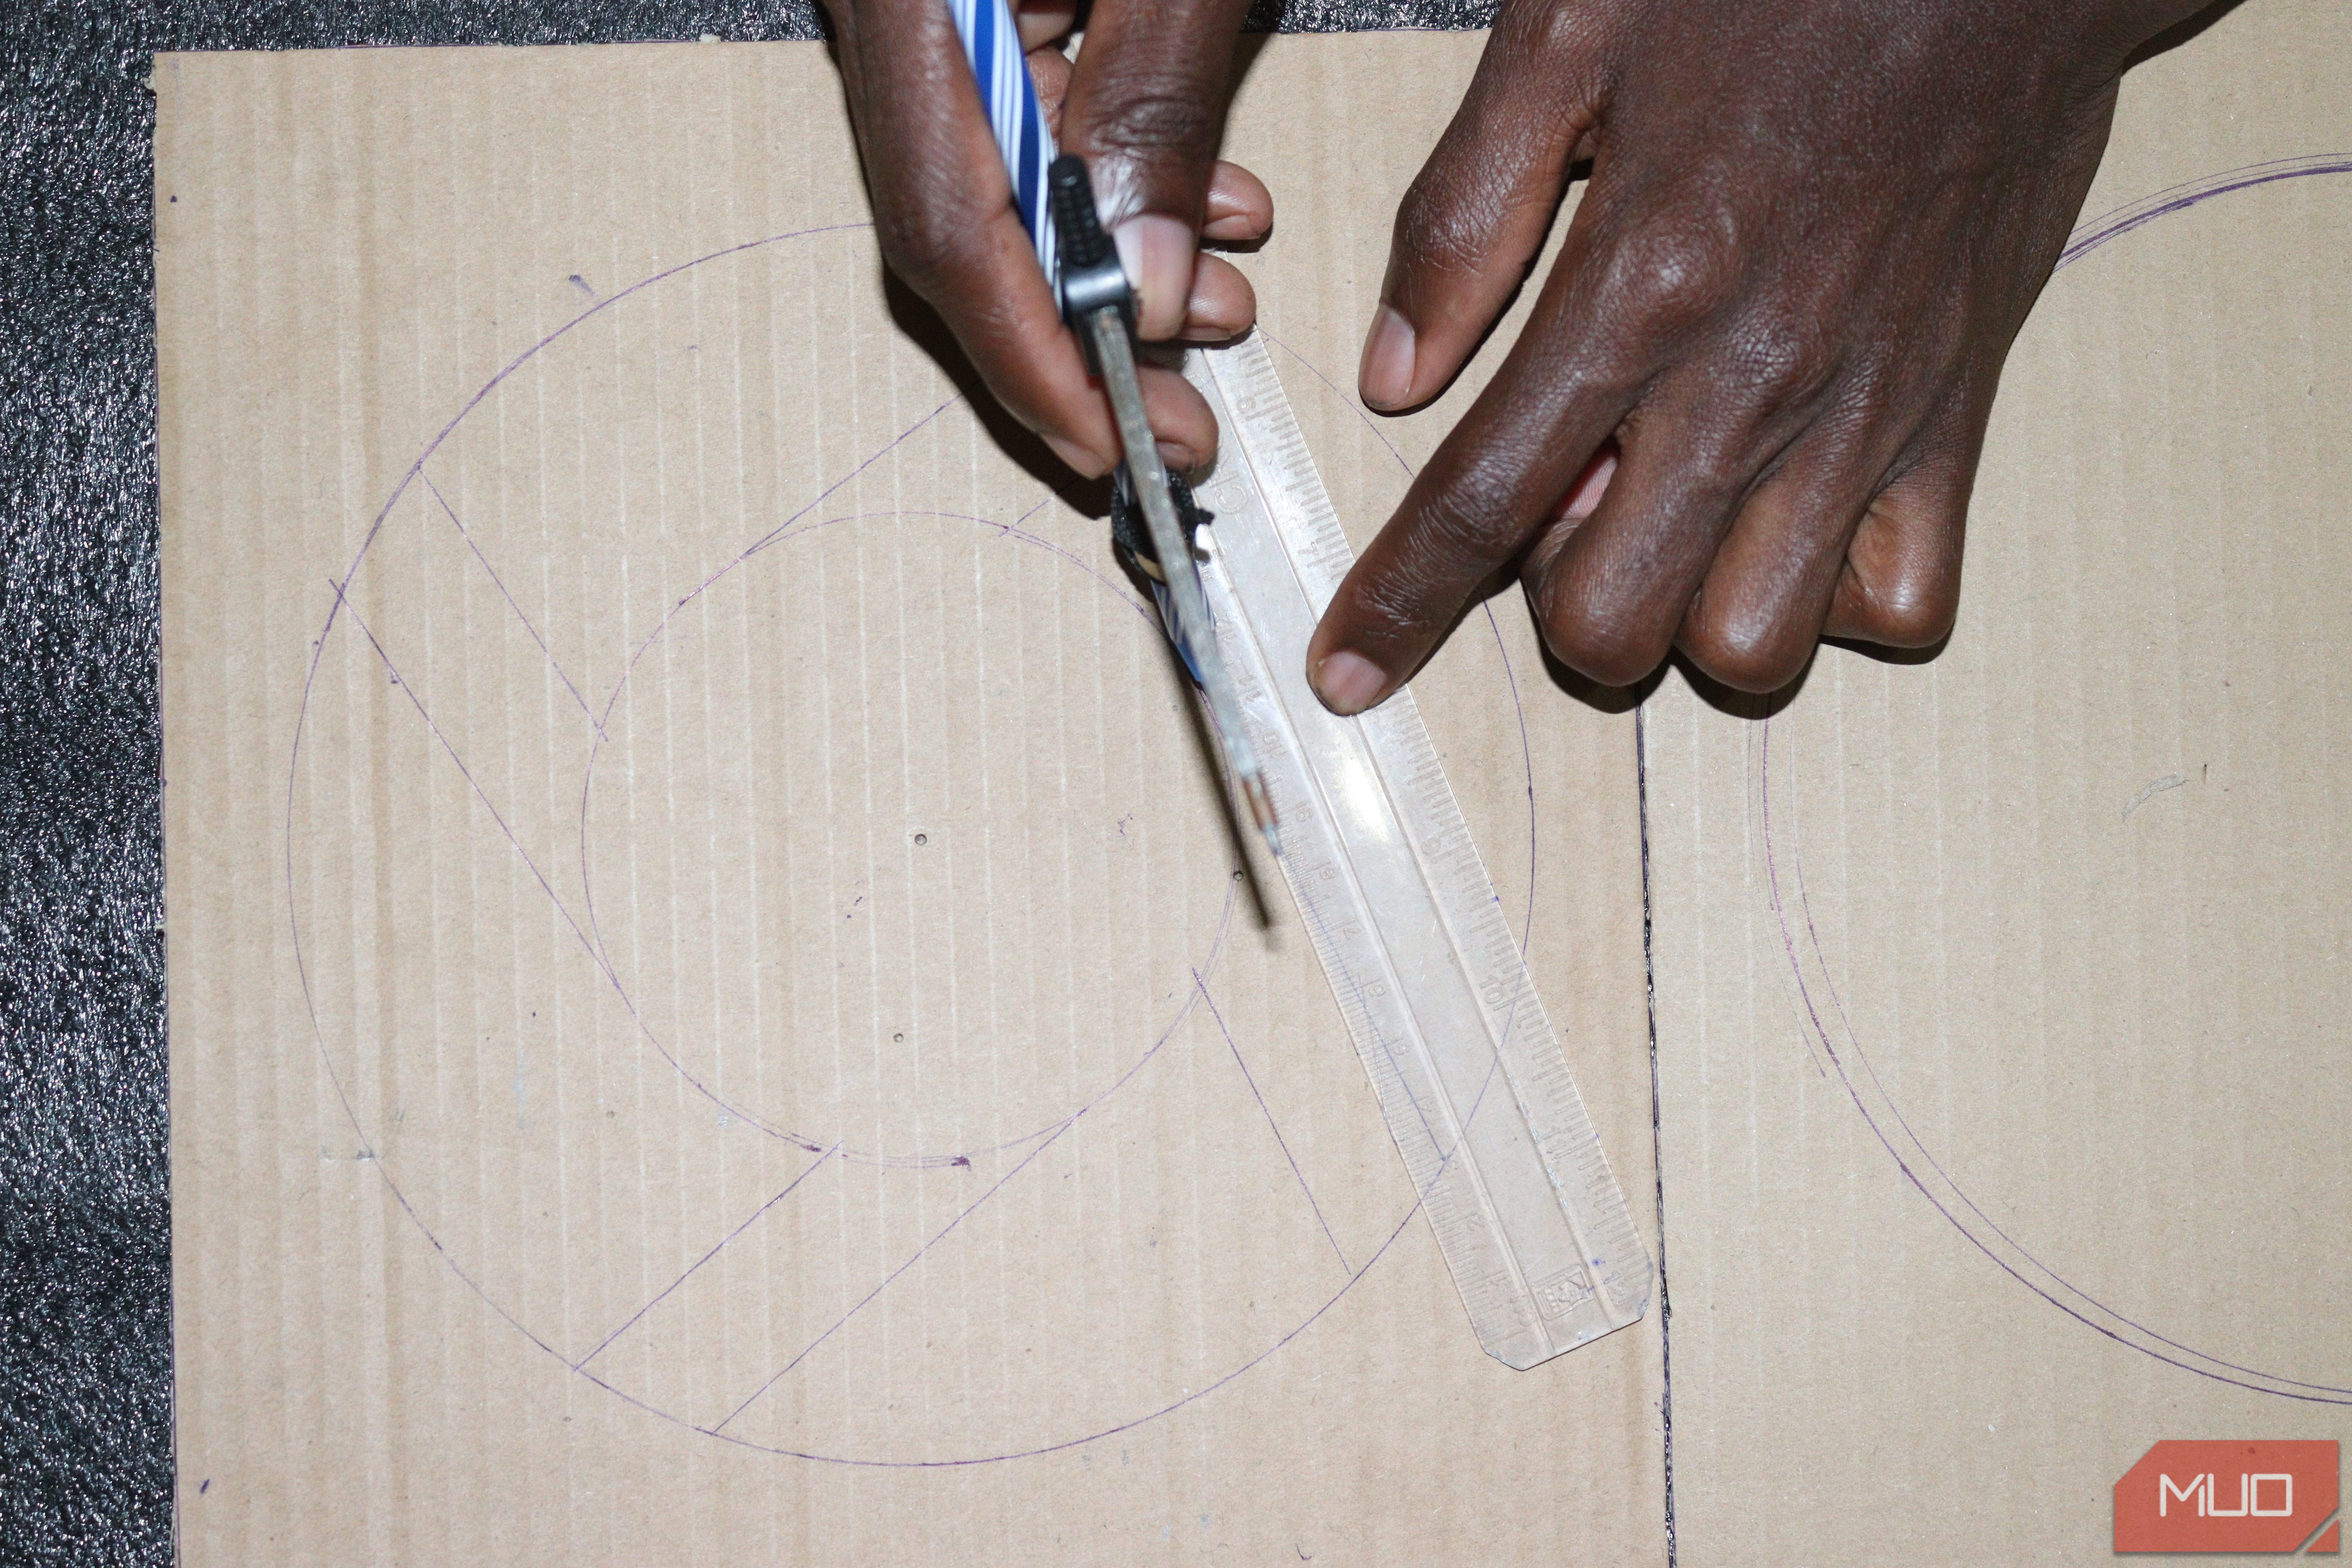 Using a compass, pen, and a ruler to draw the structure of a fan